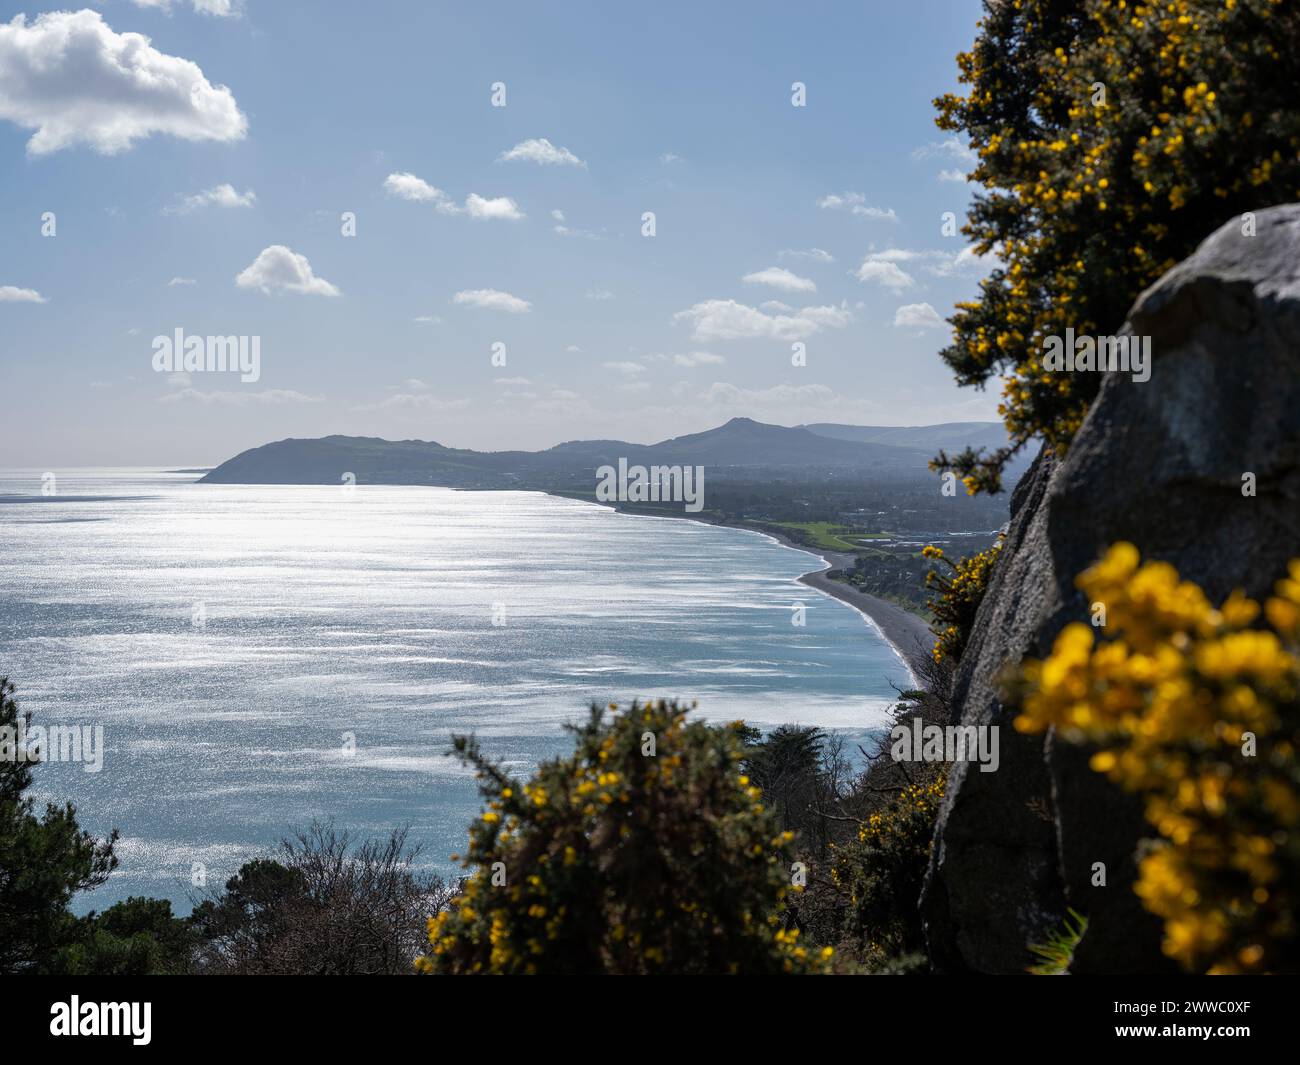 A view of the Wicklow coastline from Killiney Hill in south Dublin, ireland. Stock Photo